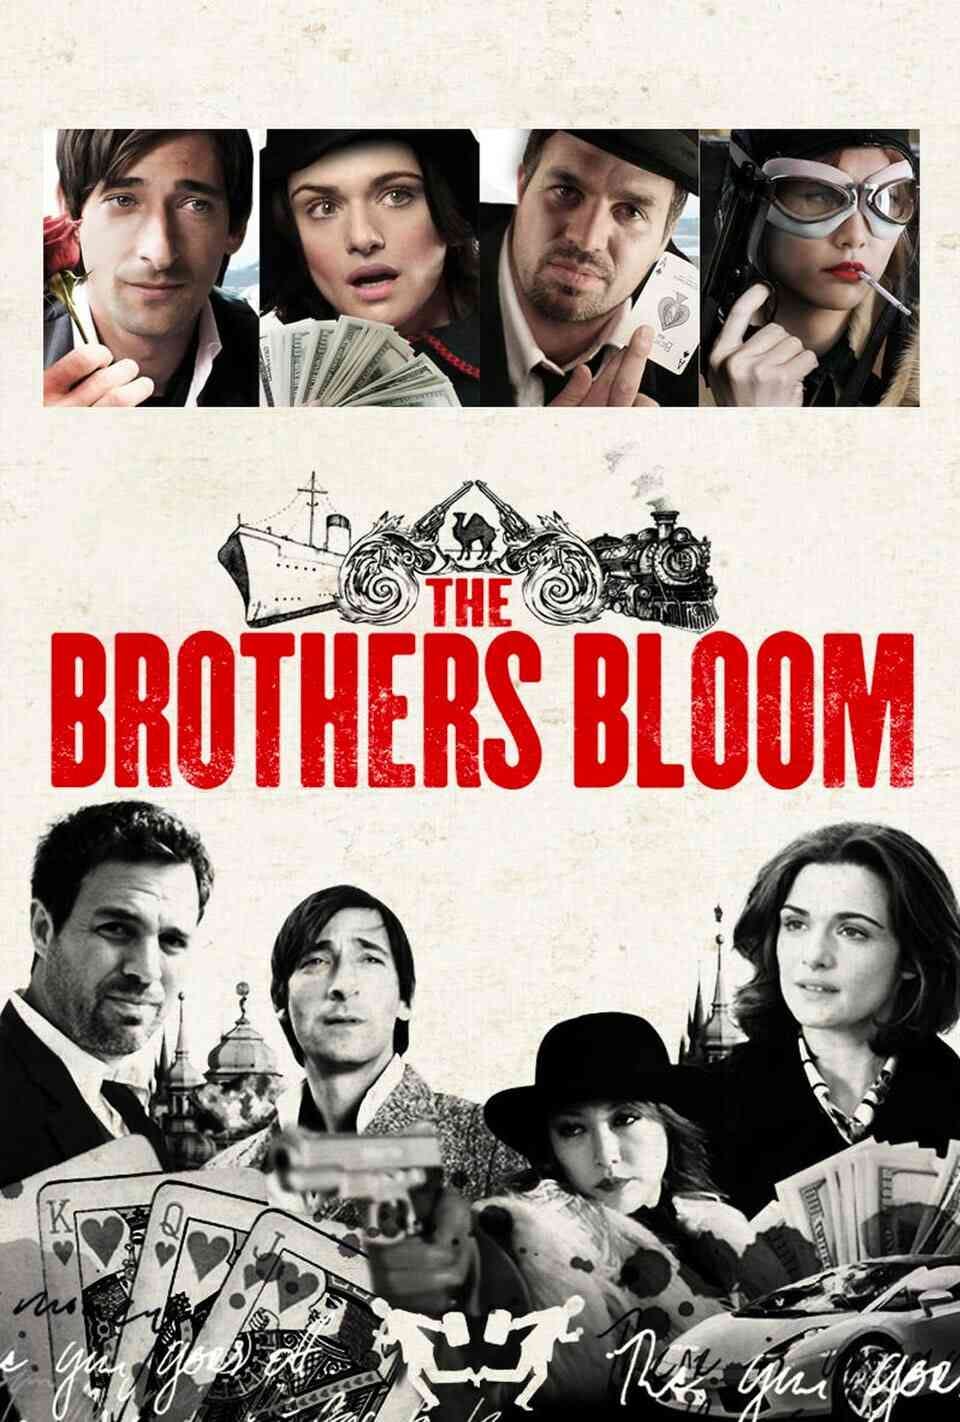 Read The Brothers Bloom screenplay.